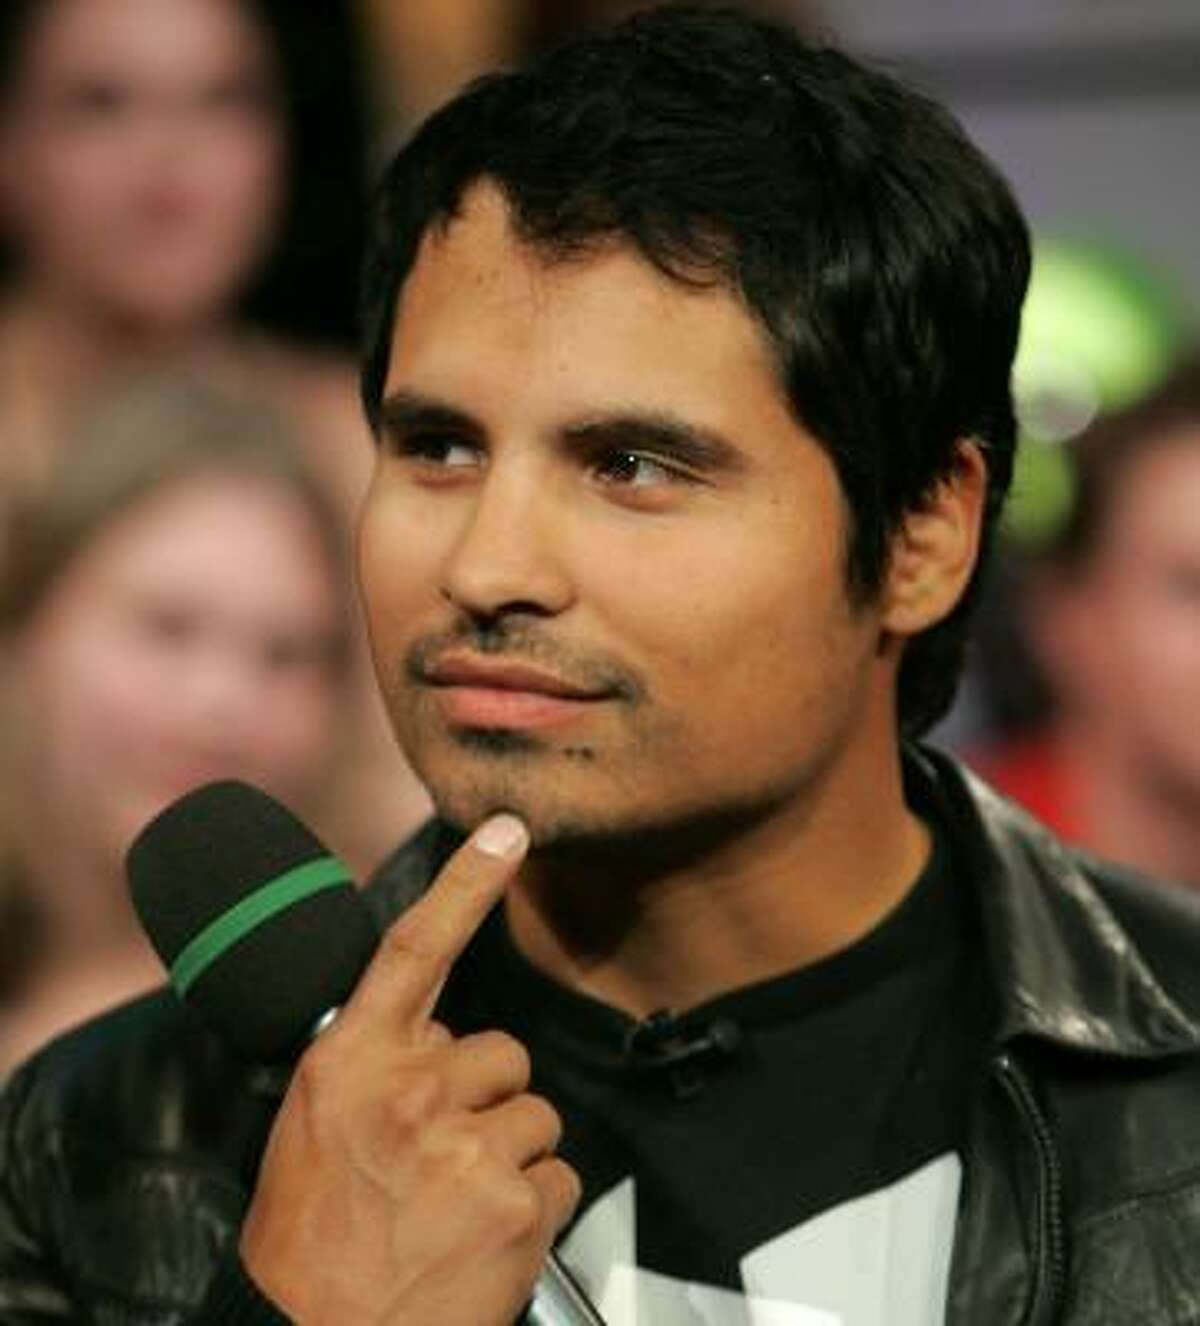 Michael Peña remains mum on the Oscar buzz surrounding Lions for Lambs.